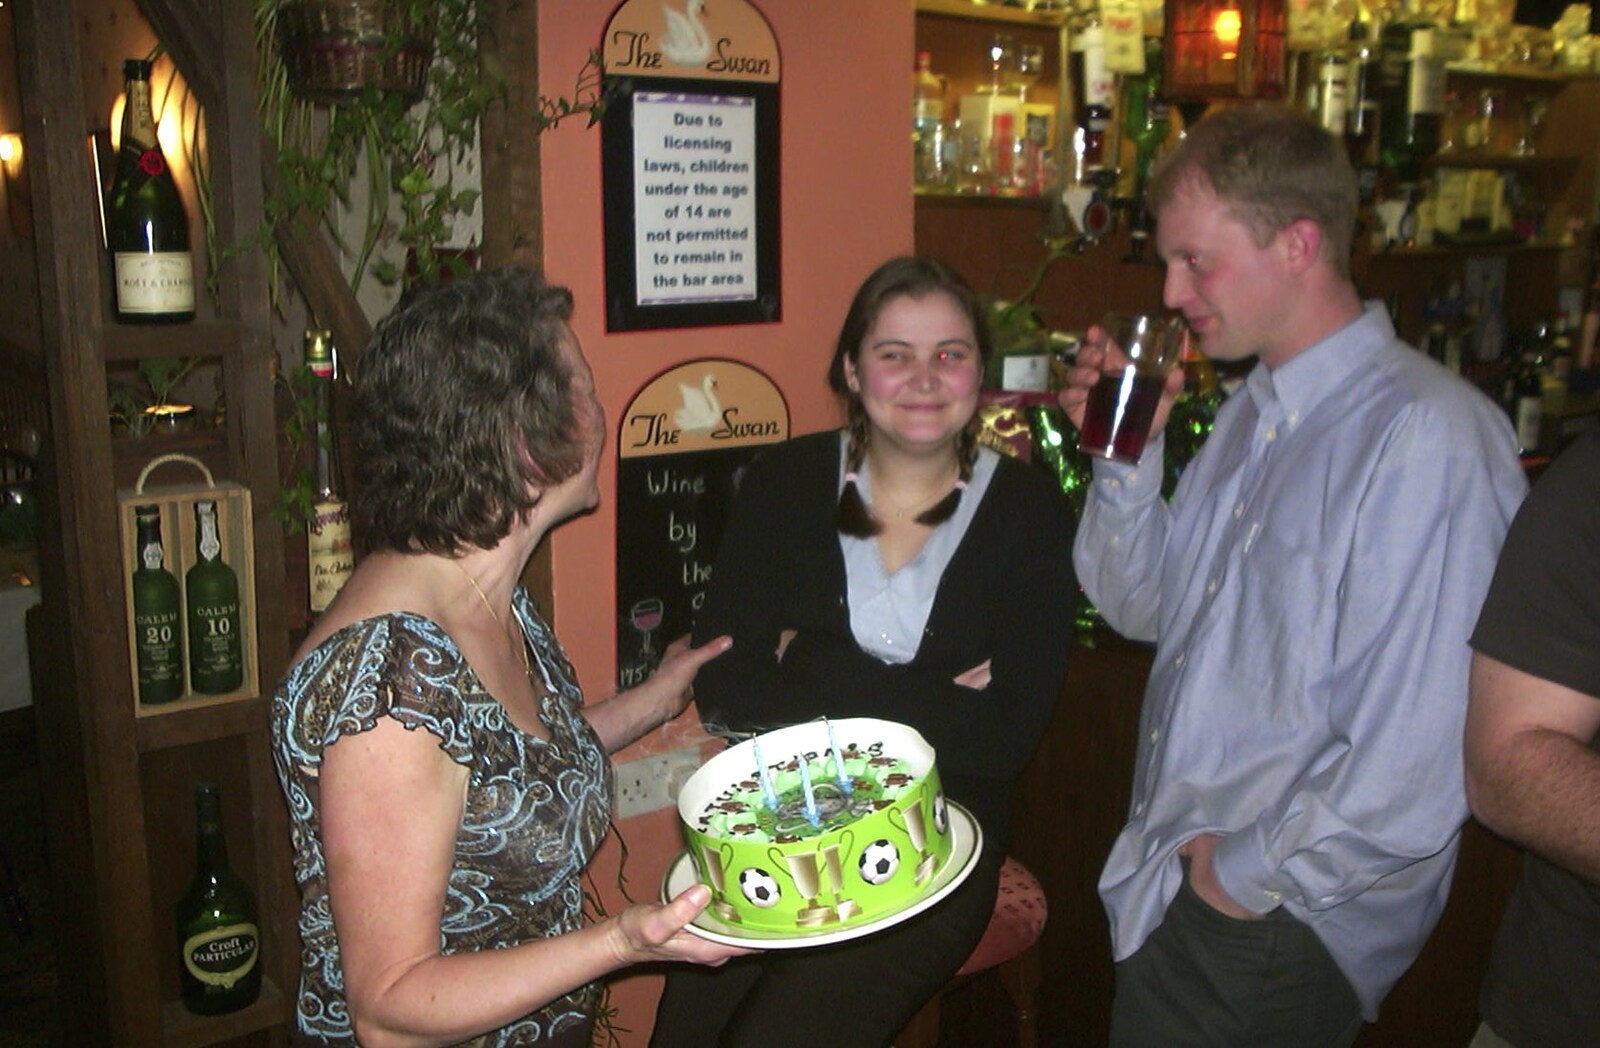 Paul and Claire's Engagement Party, Brome Swan, Suffolk - 27th March 2004: The cake does a tour